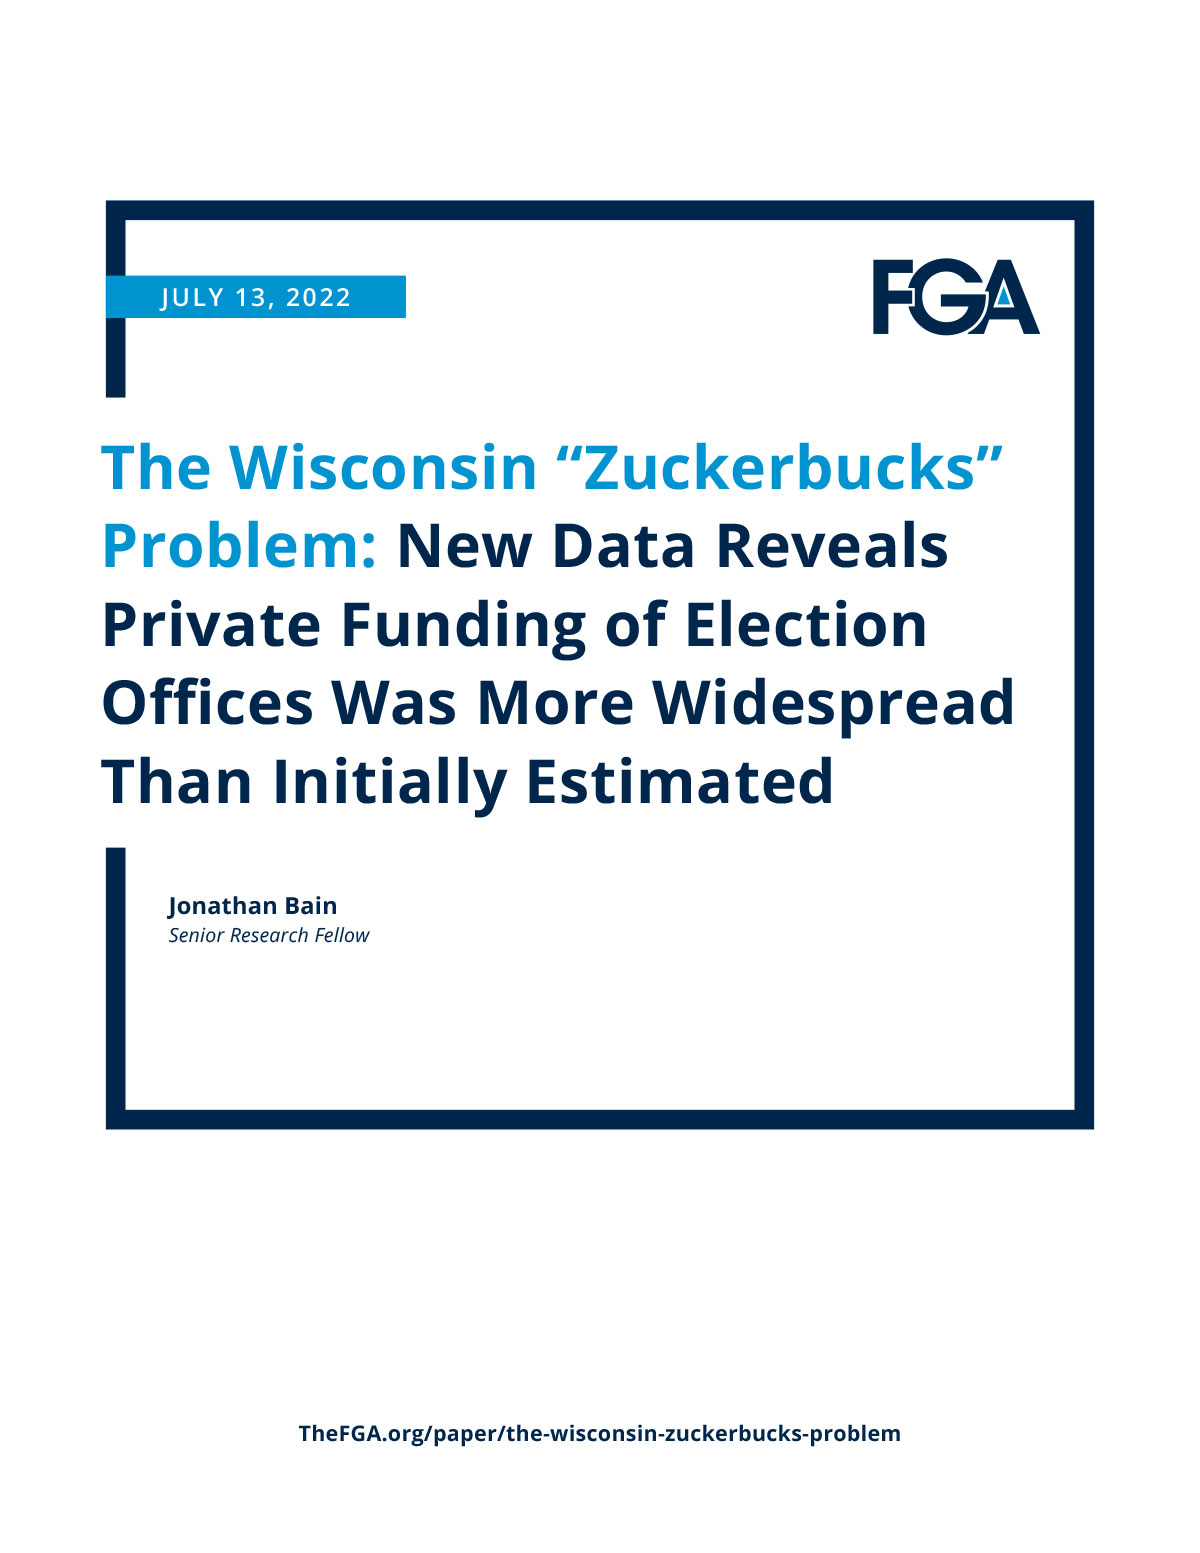 The Wisconsin “Zuckerbucks” Problem: New Data Reveals Private Funding of Election Offices Was More Widespread Than Initially Estimated